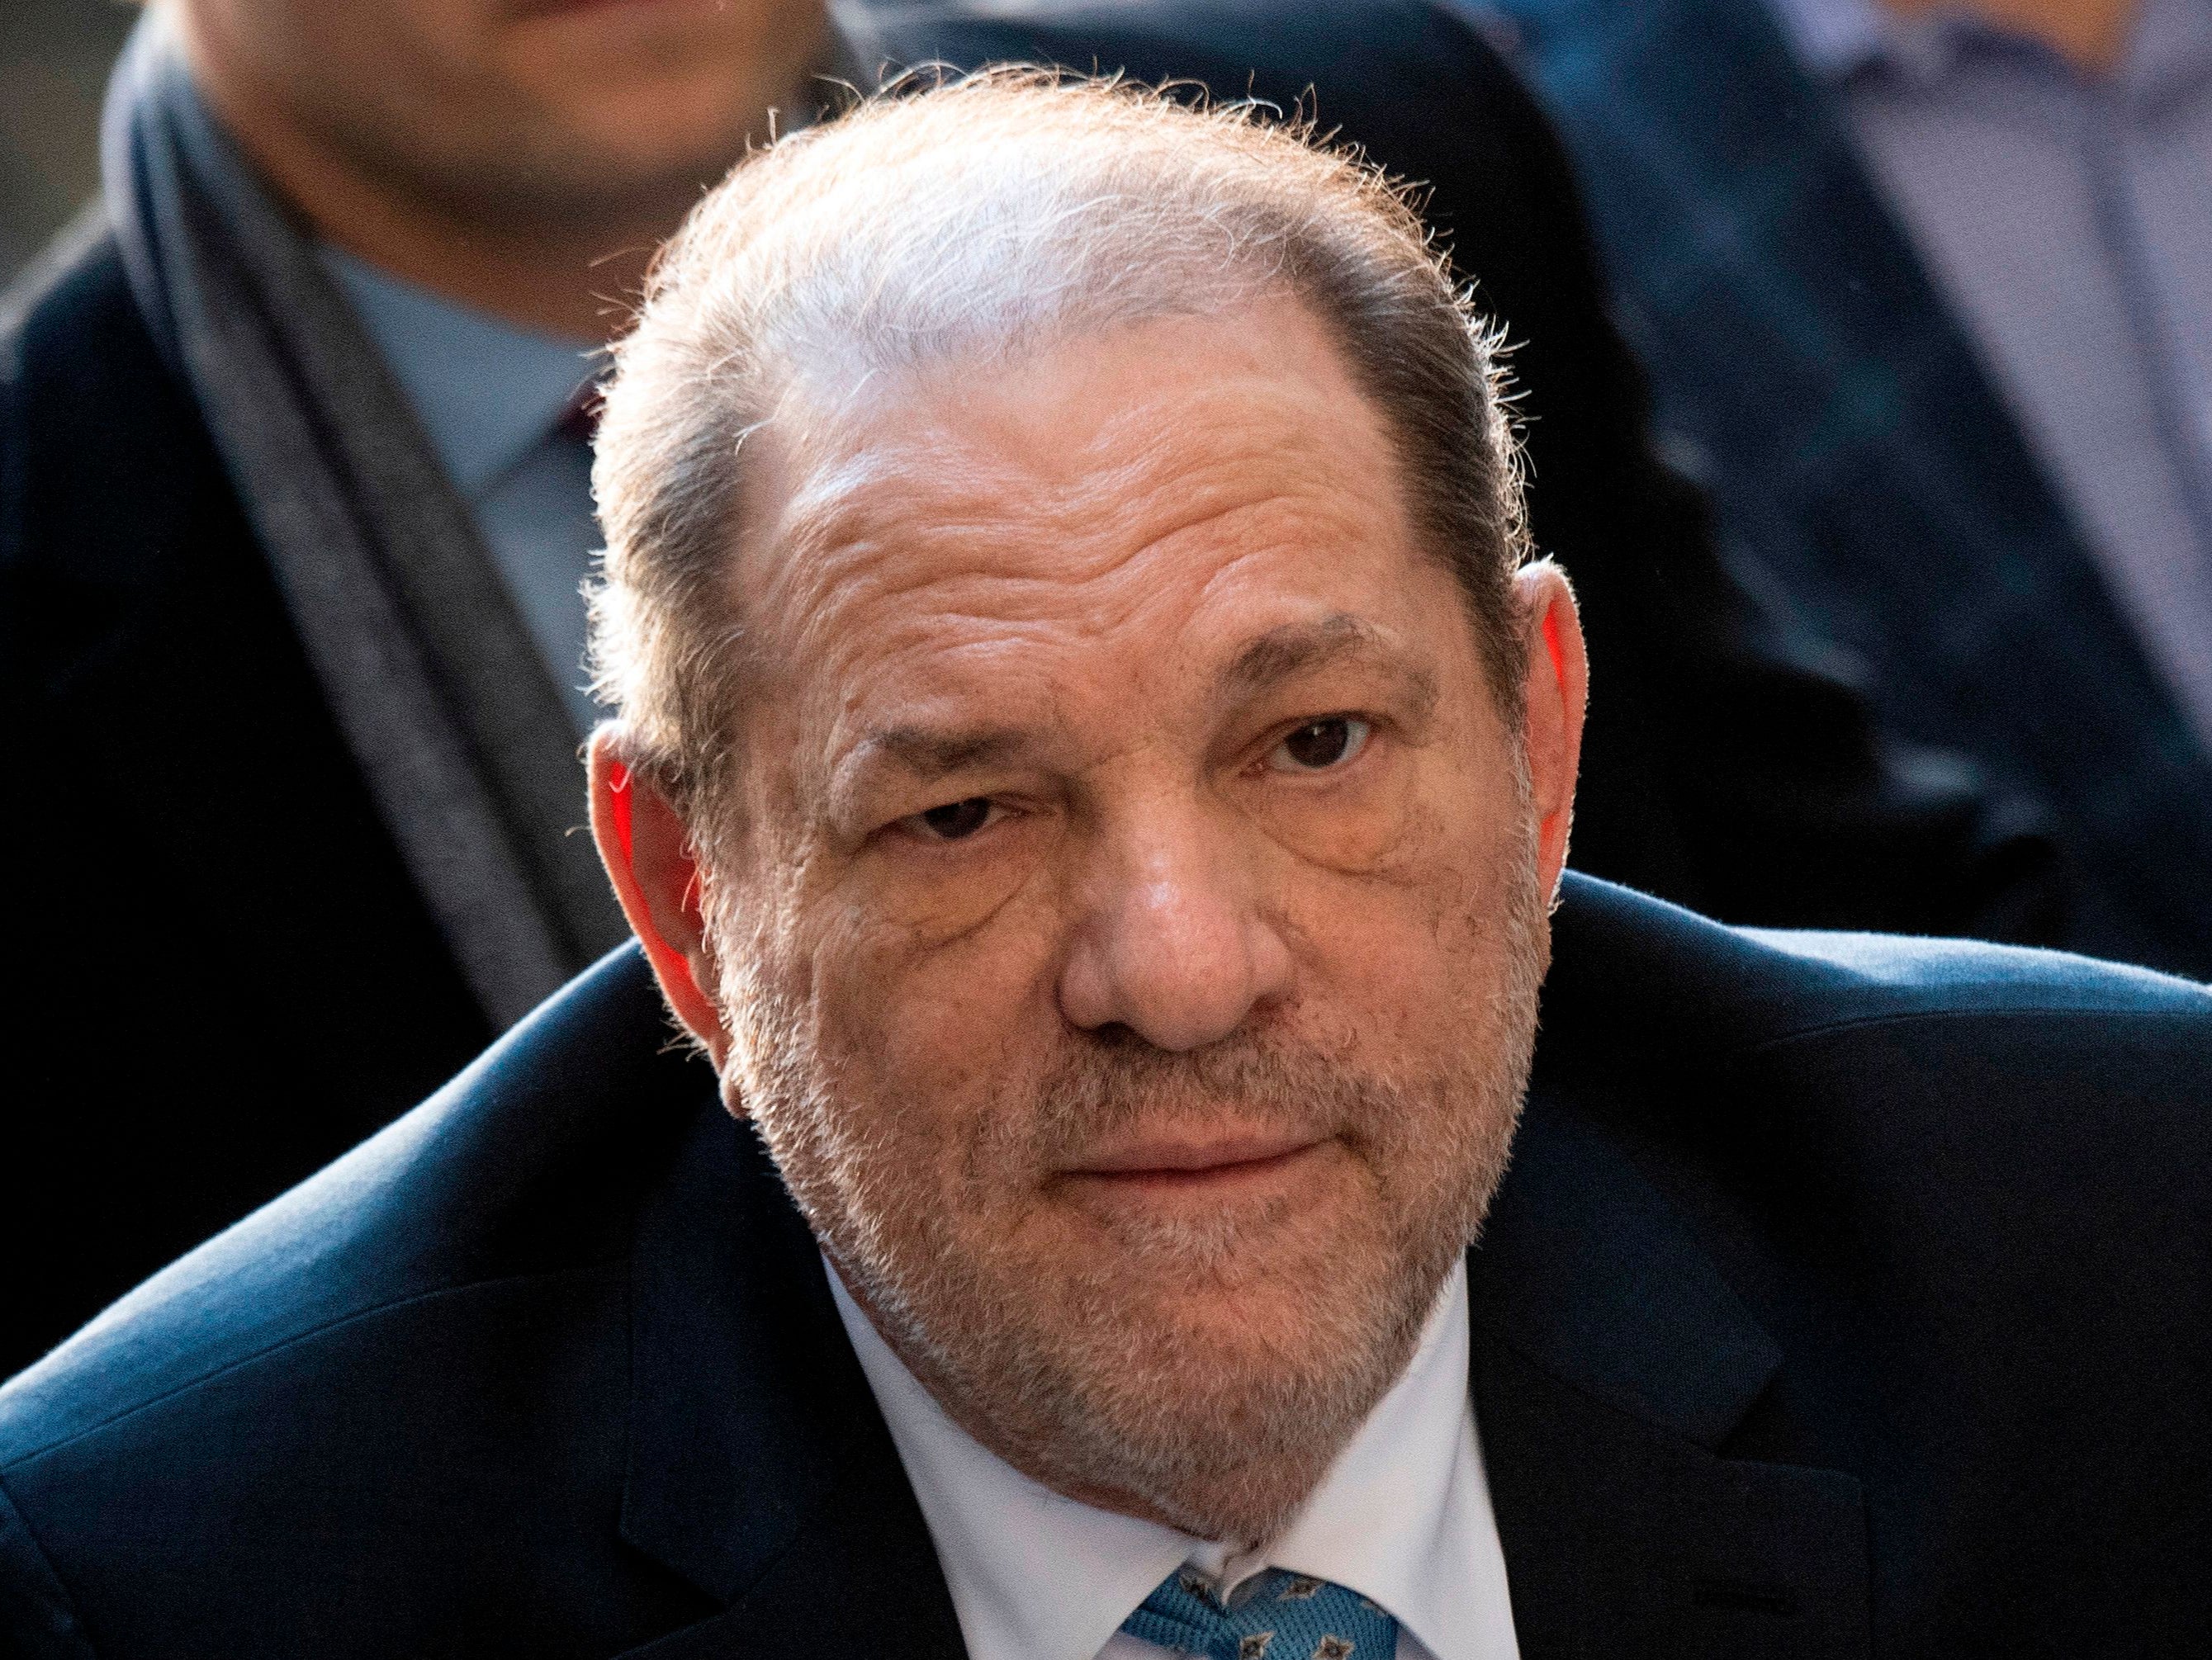 Harvey Weinstein arrives at the Manhattan Criminal Court on 24 February 2020 in New York City